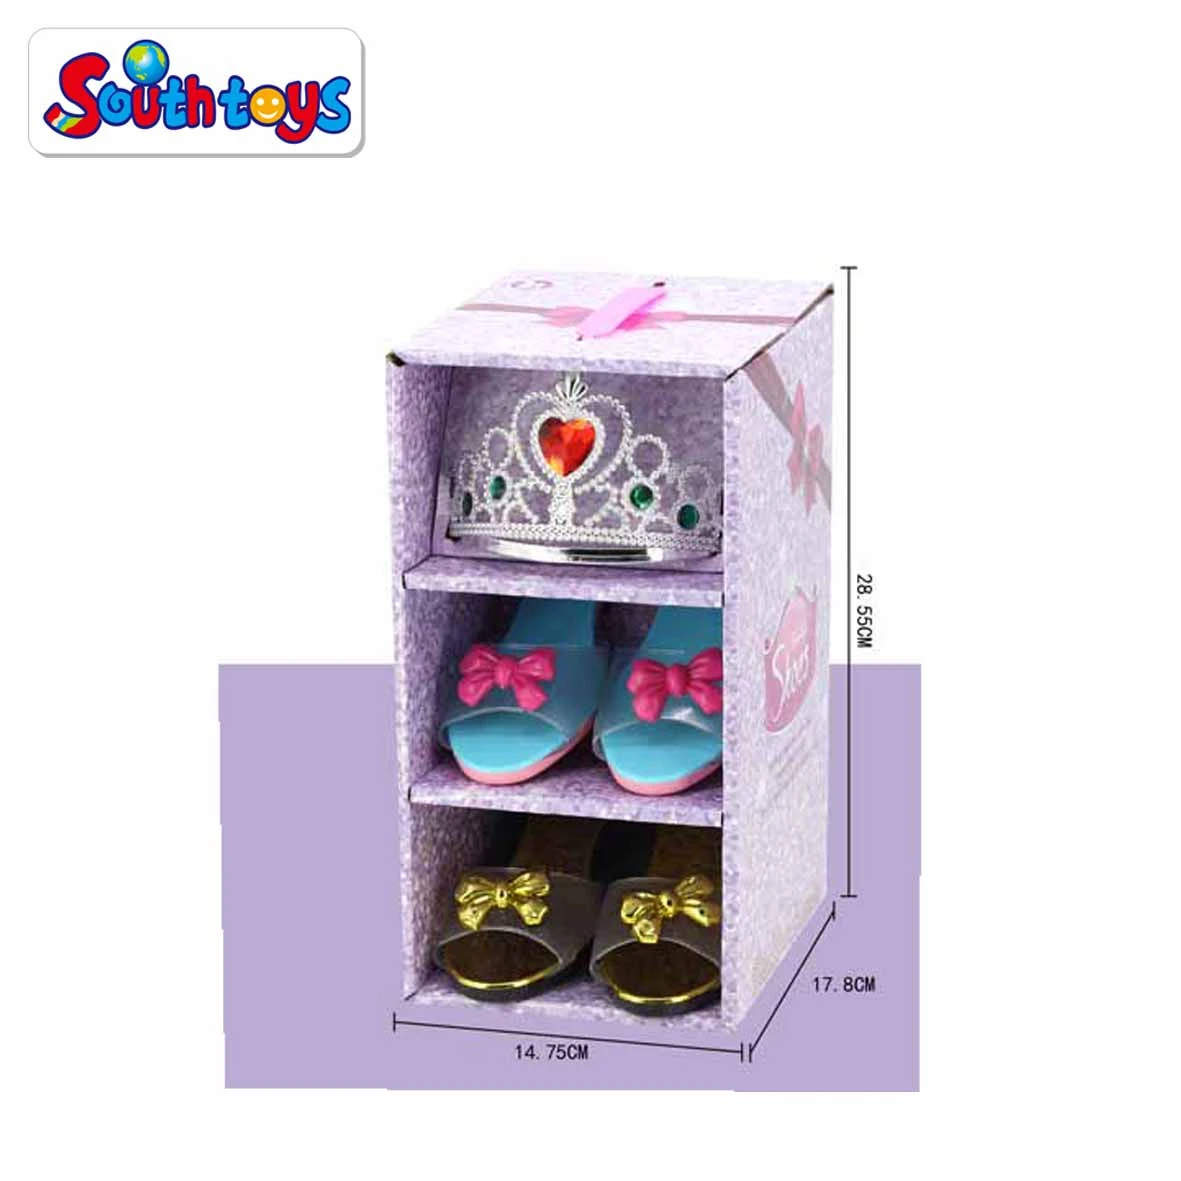 Princess Dress Up Role Play Collection Shoe set,Jewelry Boutique Pairs Collection of Earrings Bracelets Rings